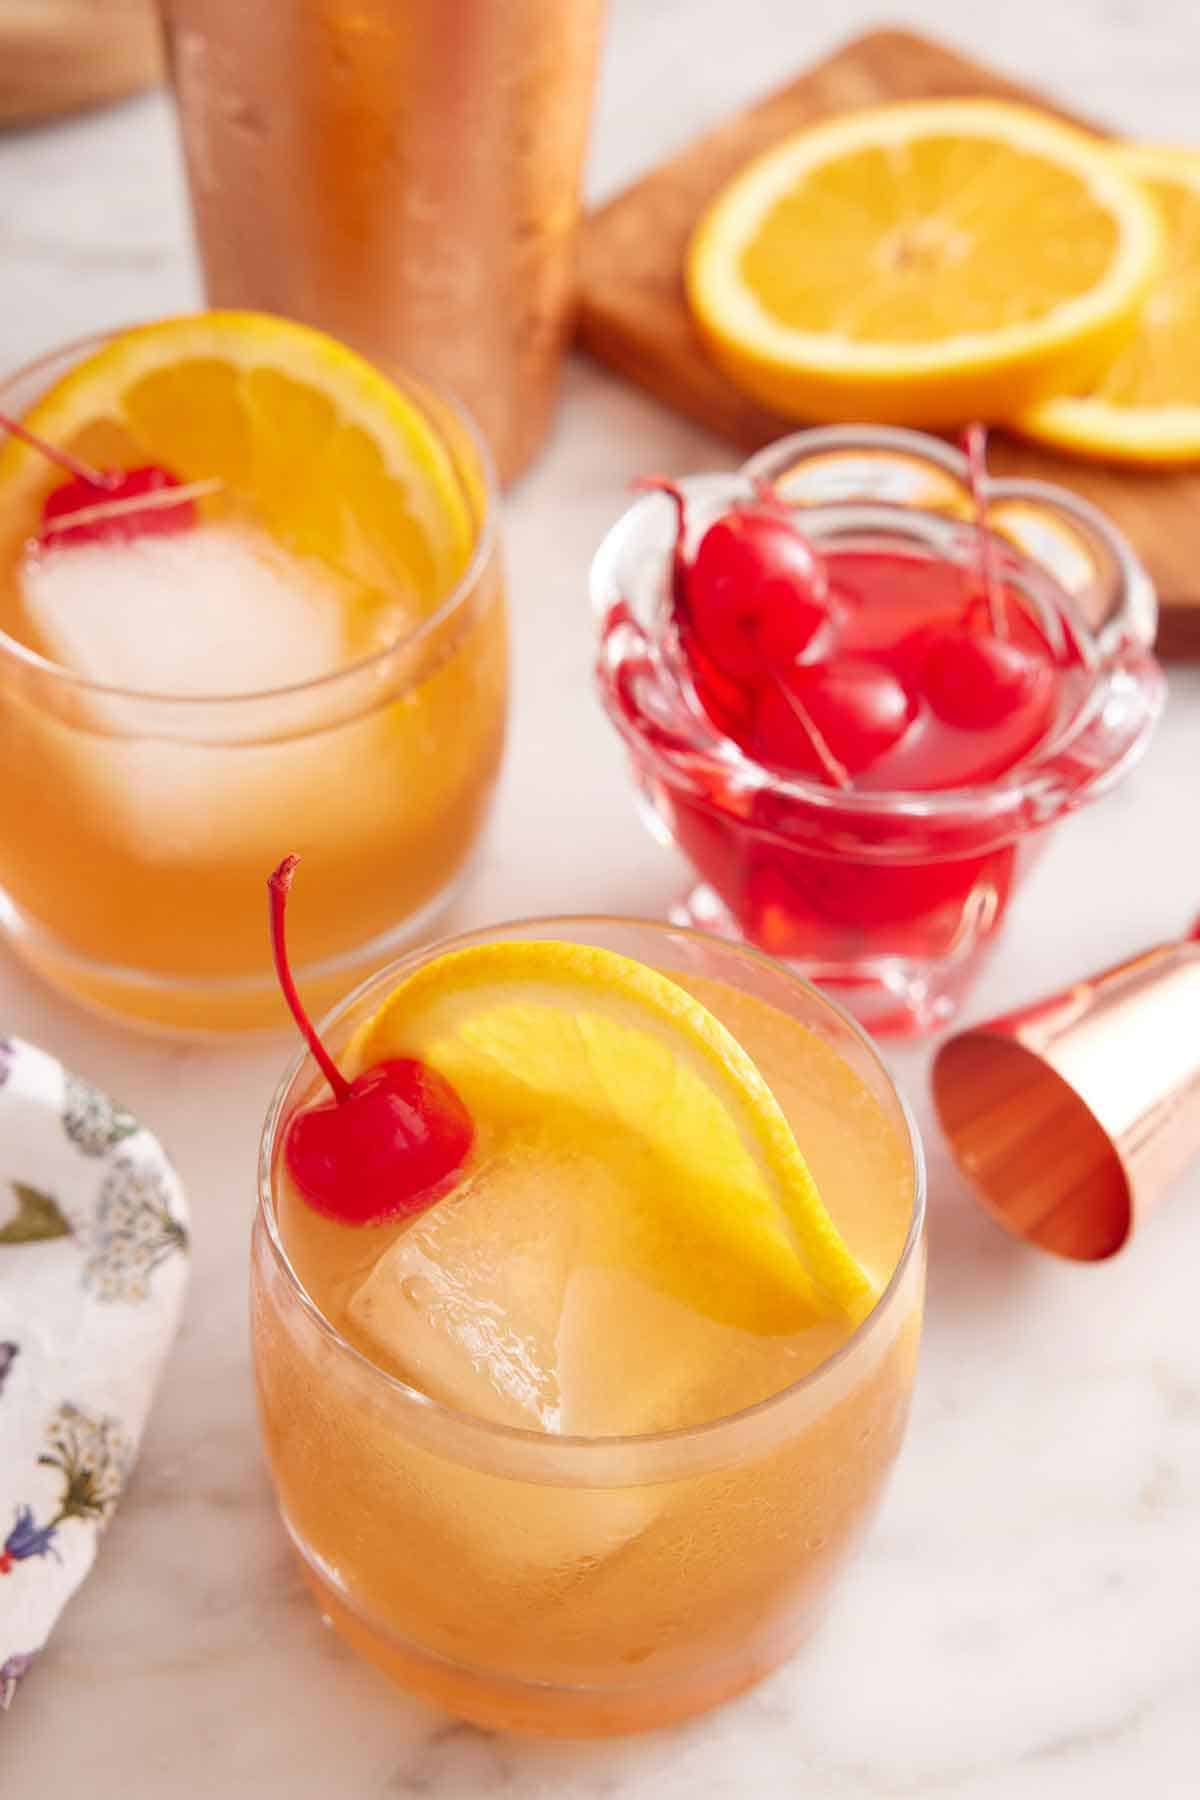 Two glasses of Amaretto Sour garnished with orange slices and maraschino cherries with a jar of more cherries and sliced orange on a cutting board in the back.